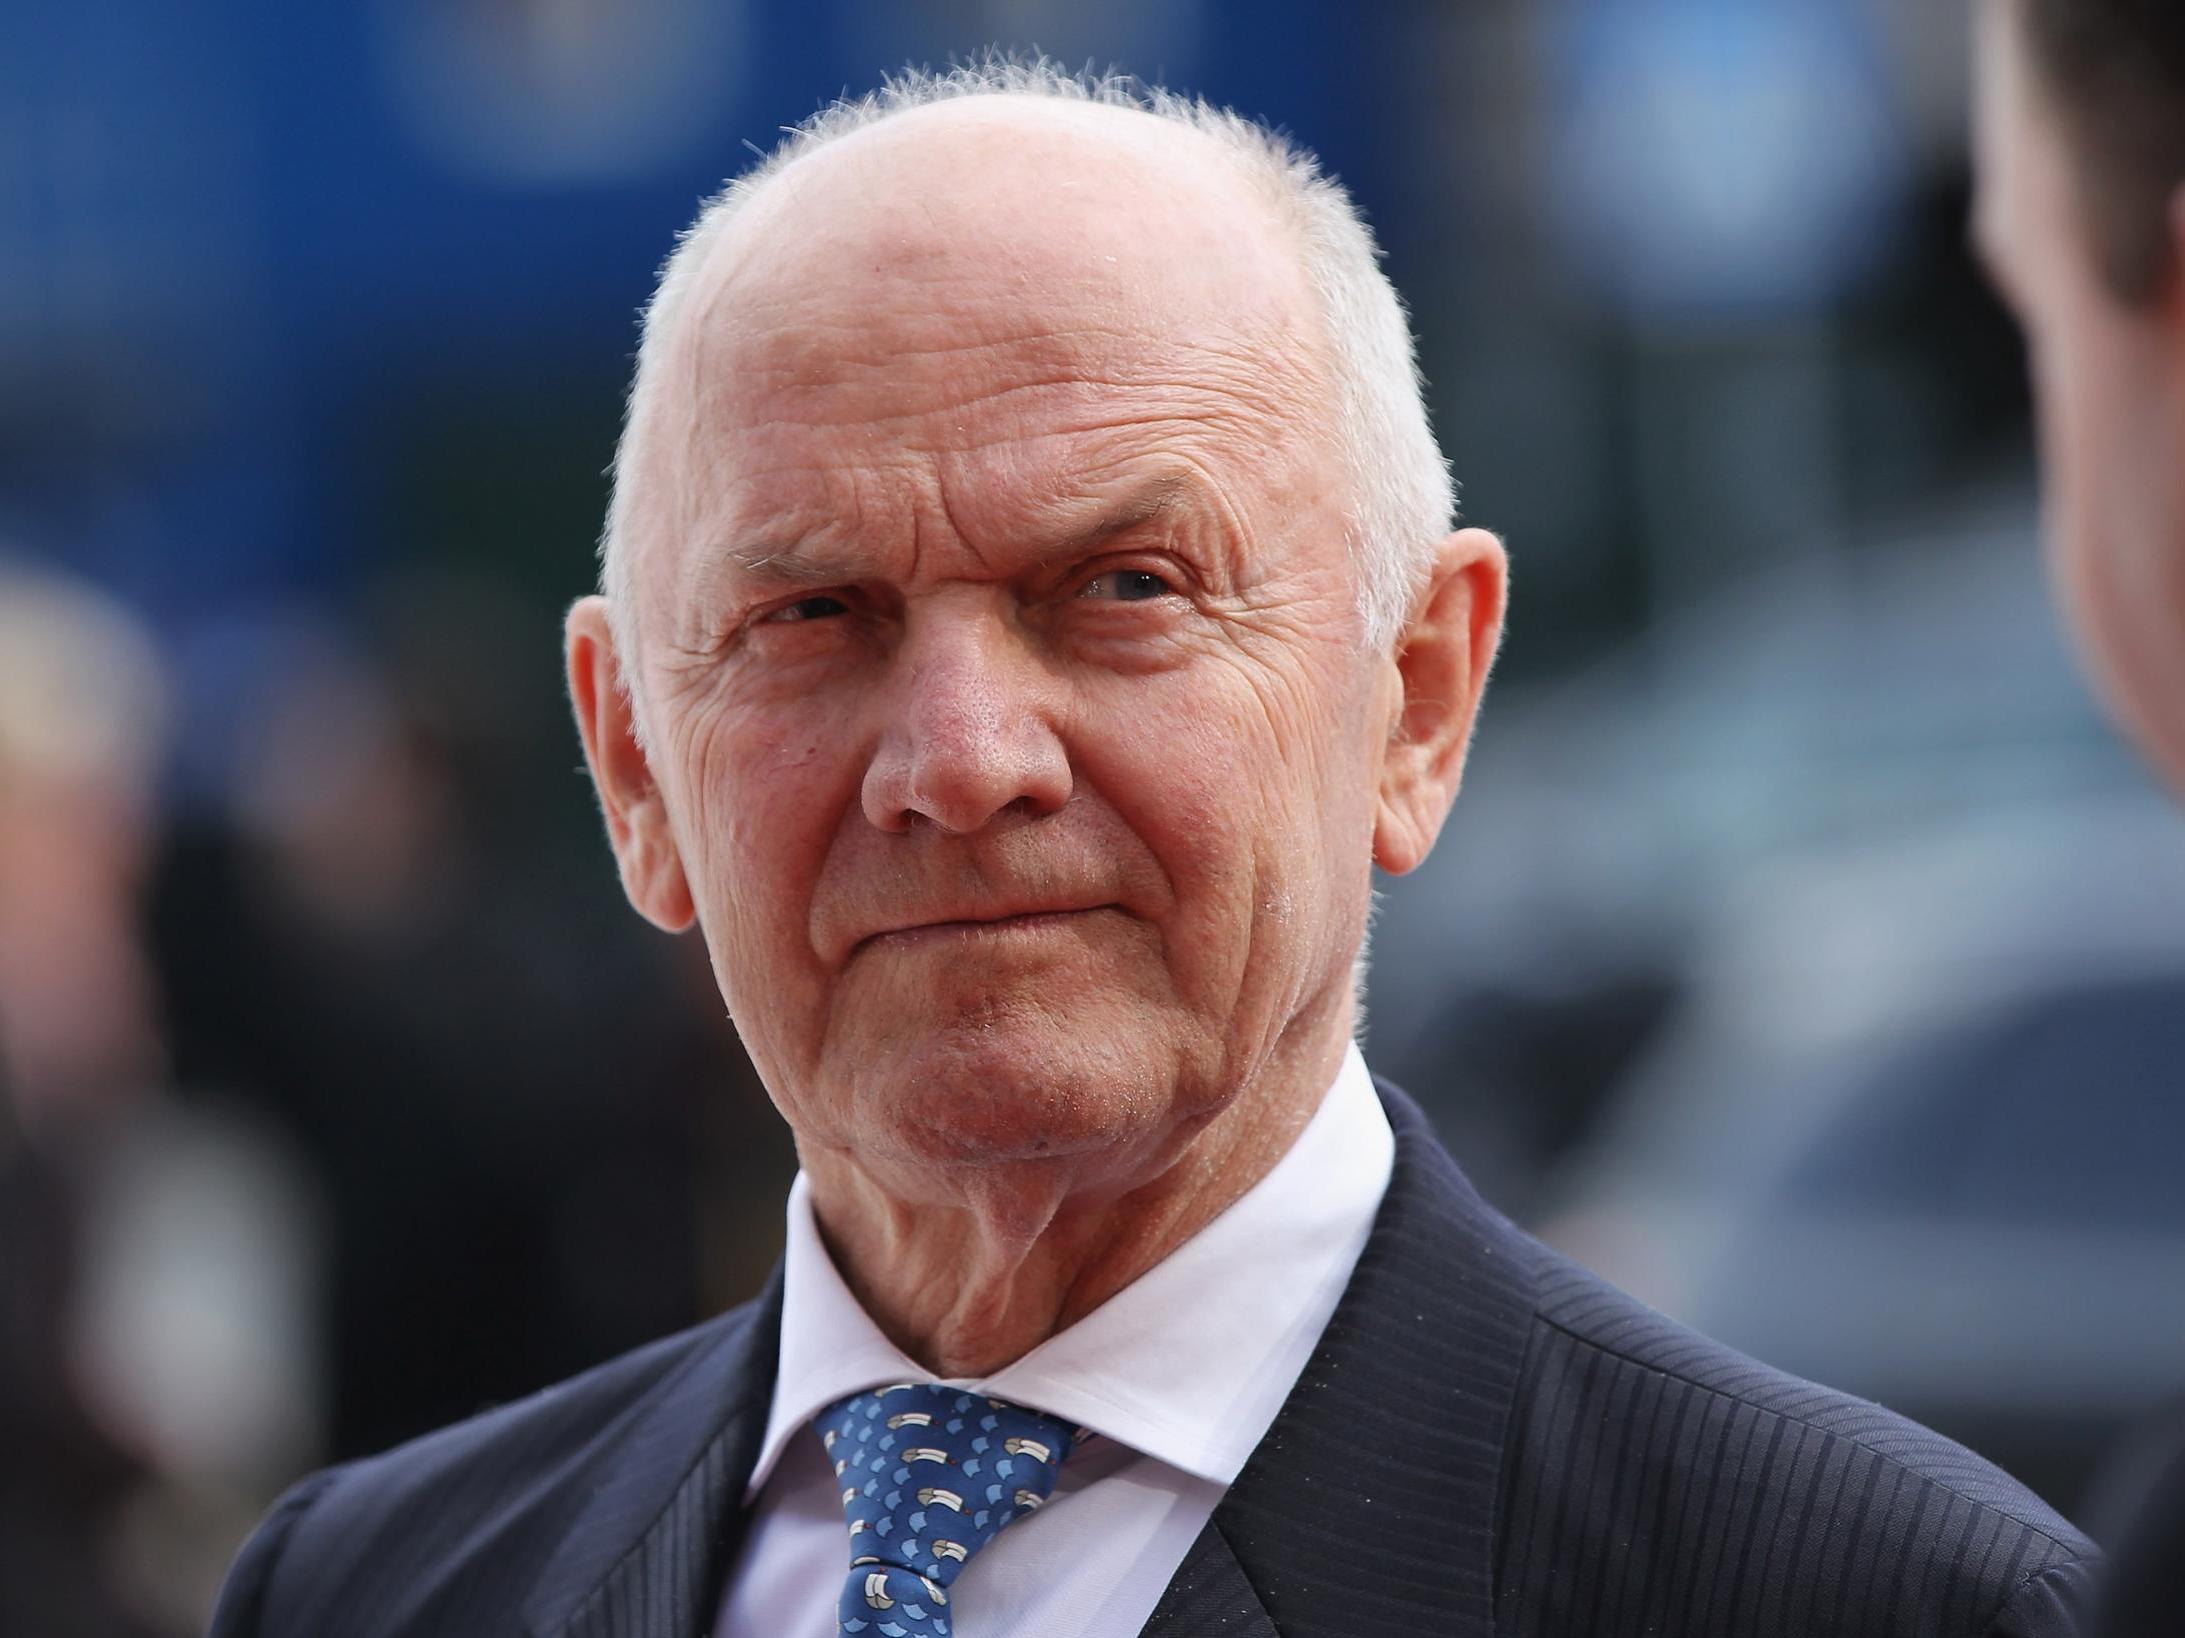 Piech won praise for steering Volkswagen out of a financial ditch